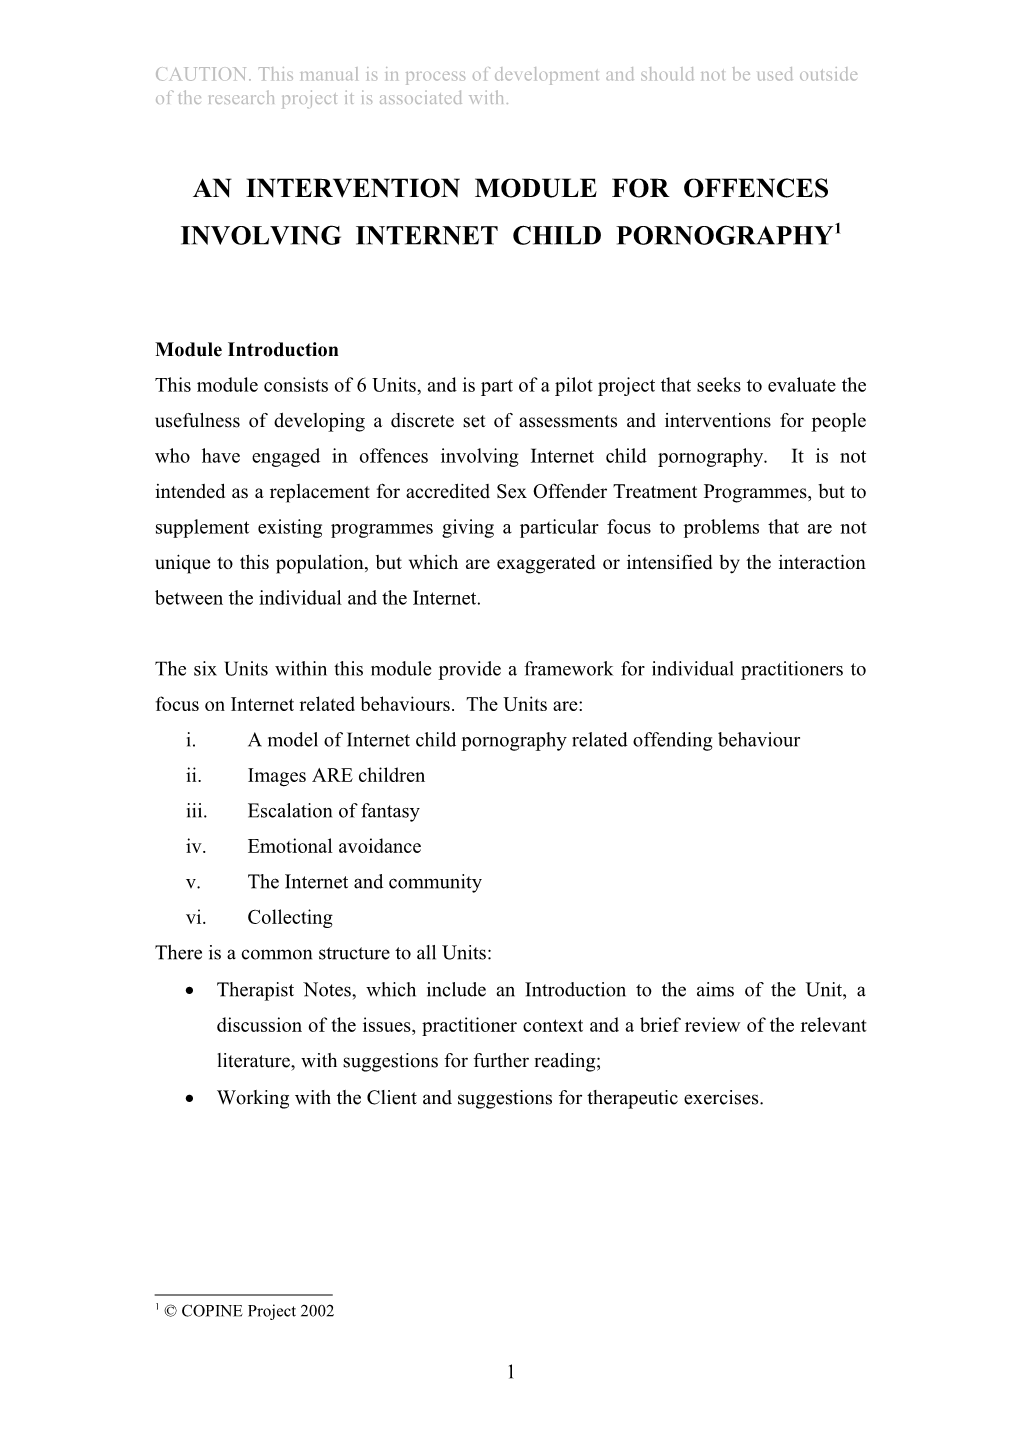 An Intervention Module for Offences Involving Internet Child Pornography